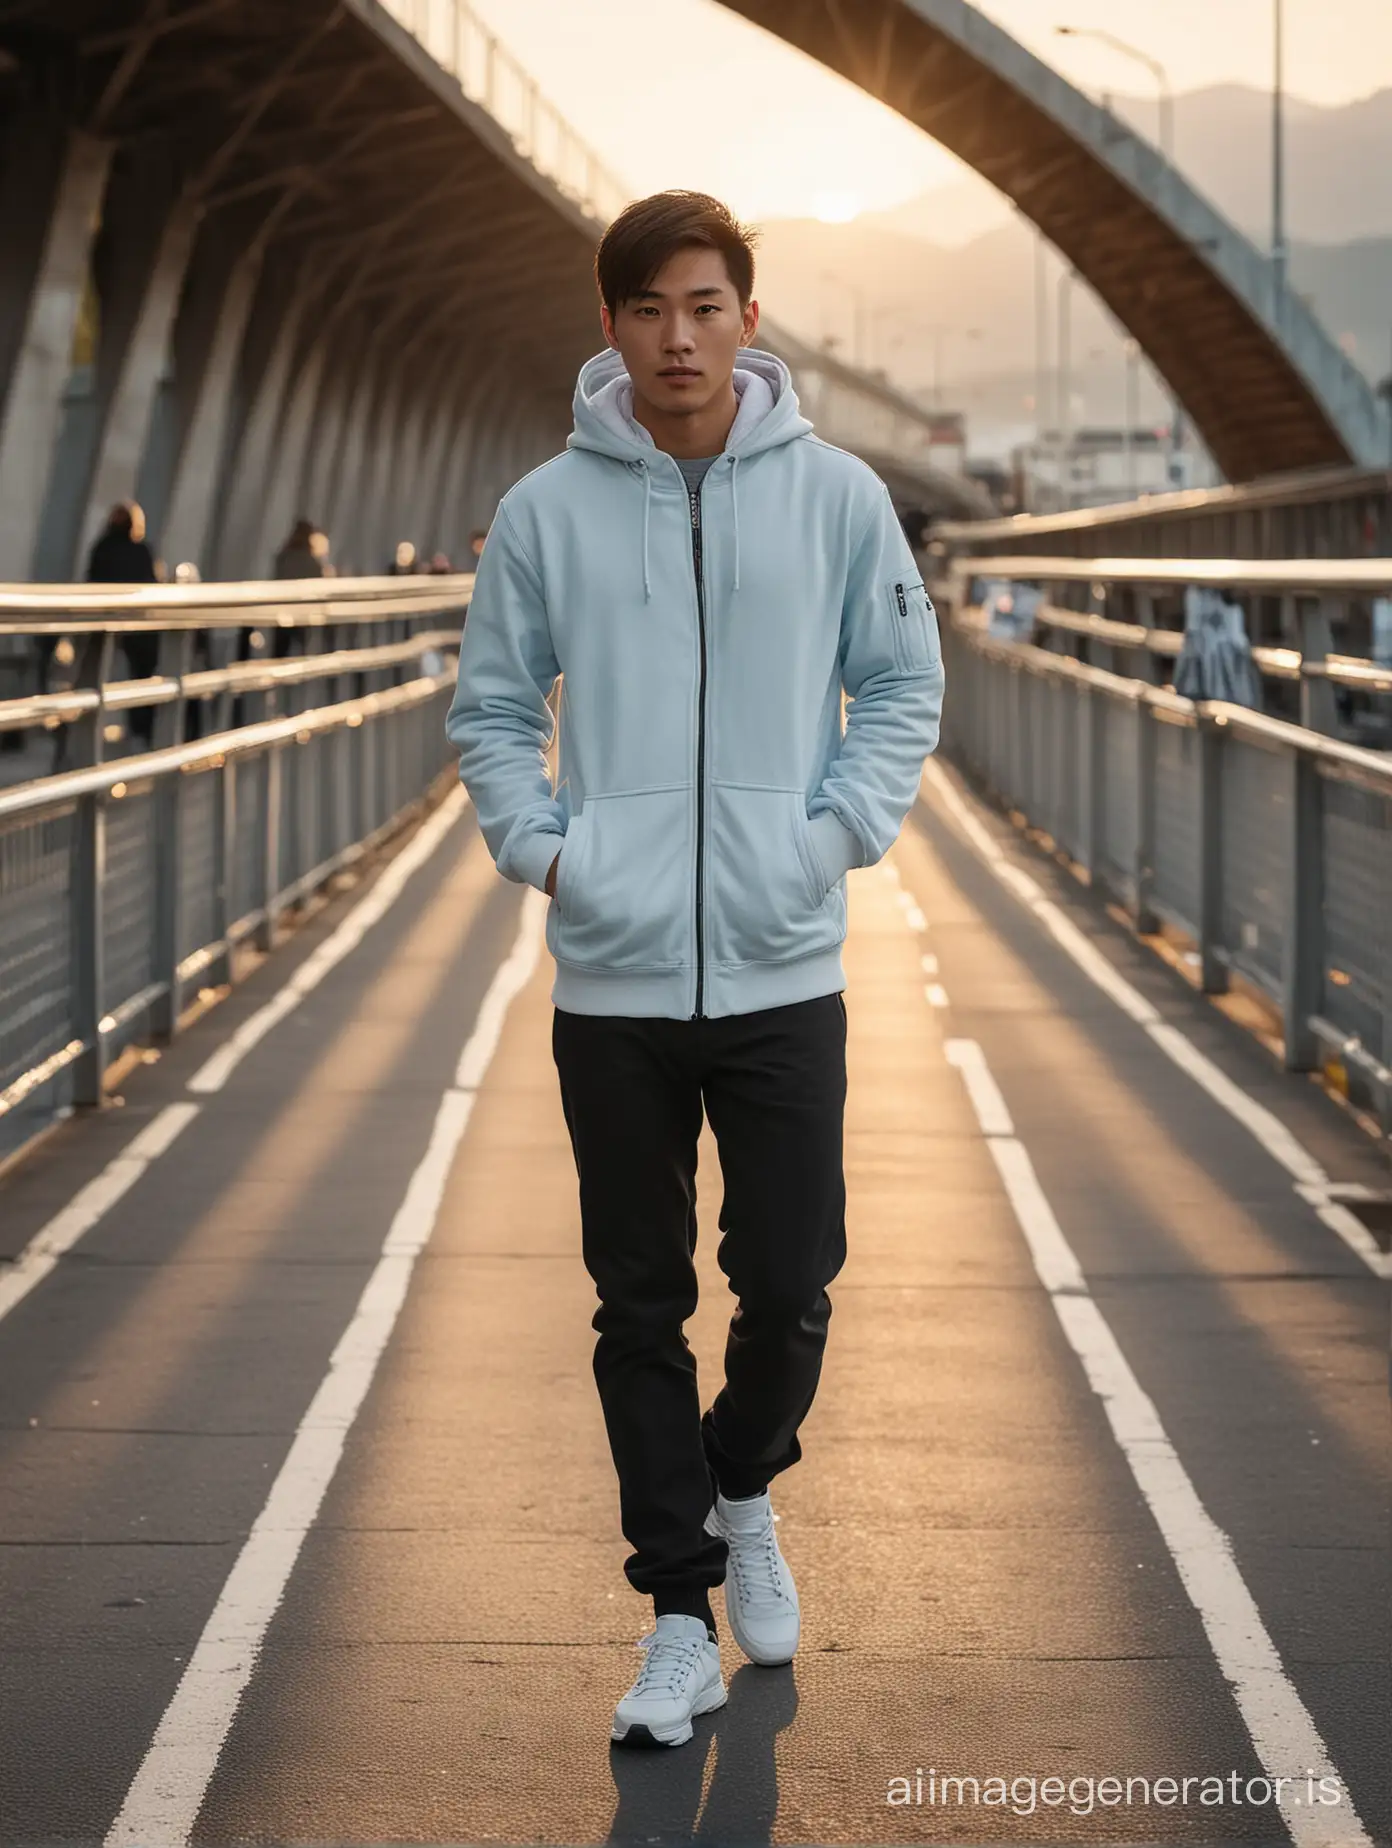 "A masterpiece long shot of a young Asian man with very short hair, wearing an open white and black hoodie jacket, light blue slim-fit pants, Airwalk shoes, and black gloves, casually strolling on the Europabrucke Bridge in Switzerland, facing the camera during the late afternoon. The sunset adds dramatic effects with bokeh and auto focus, showcasing the highly detailed and realistic quality of the scene."